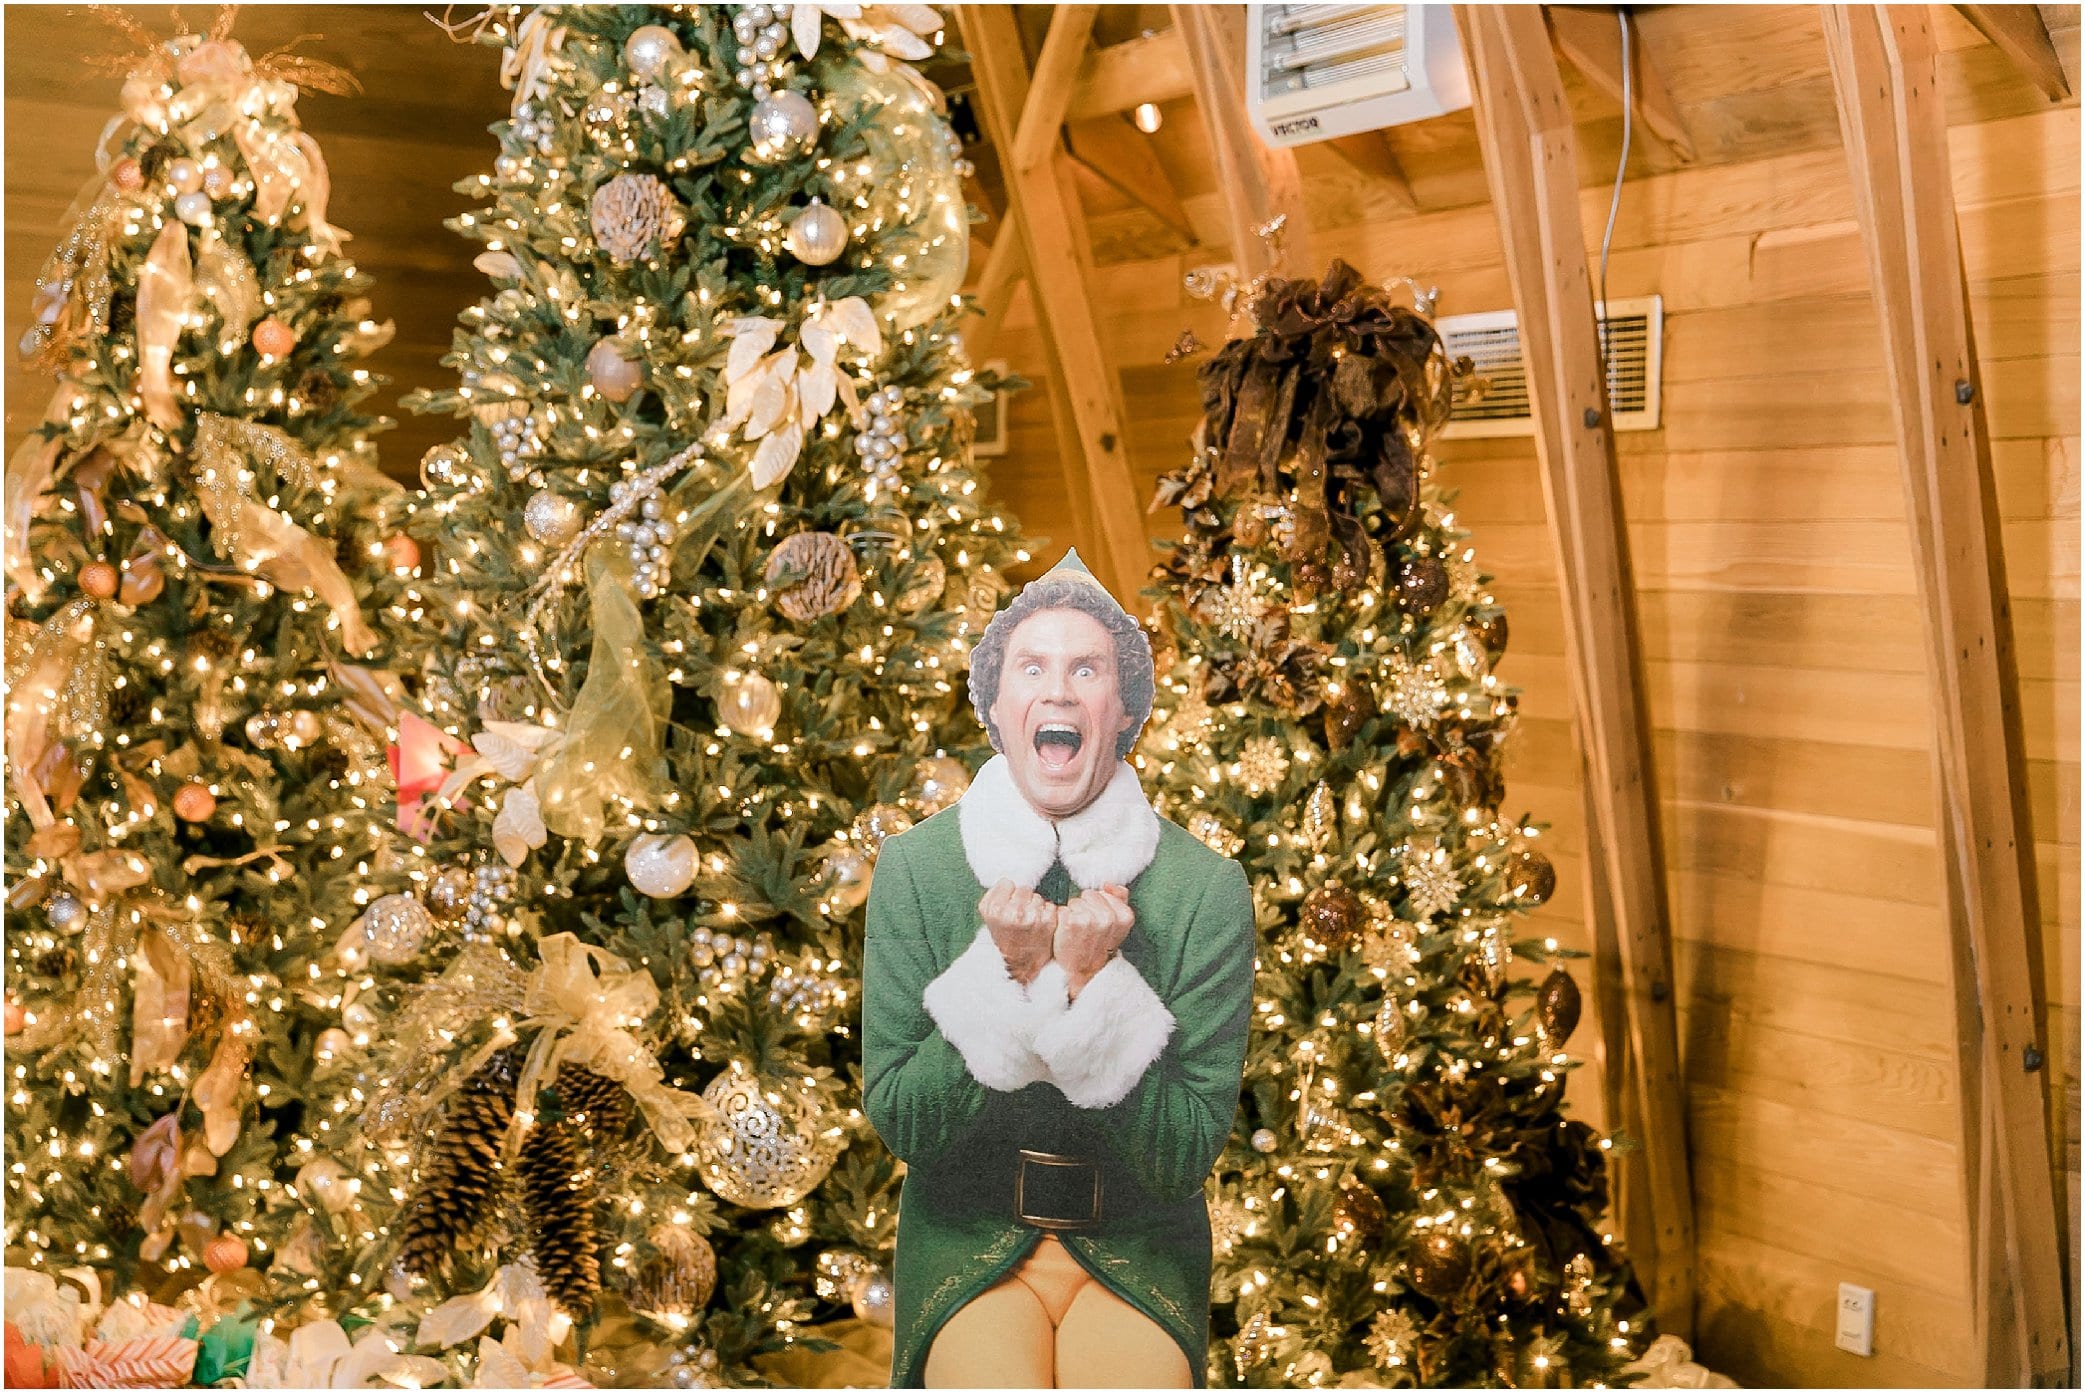 elf life size cut out